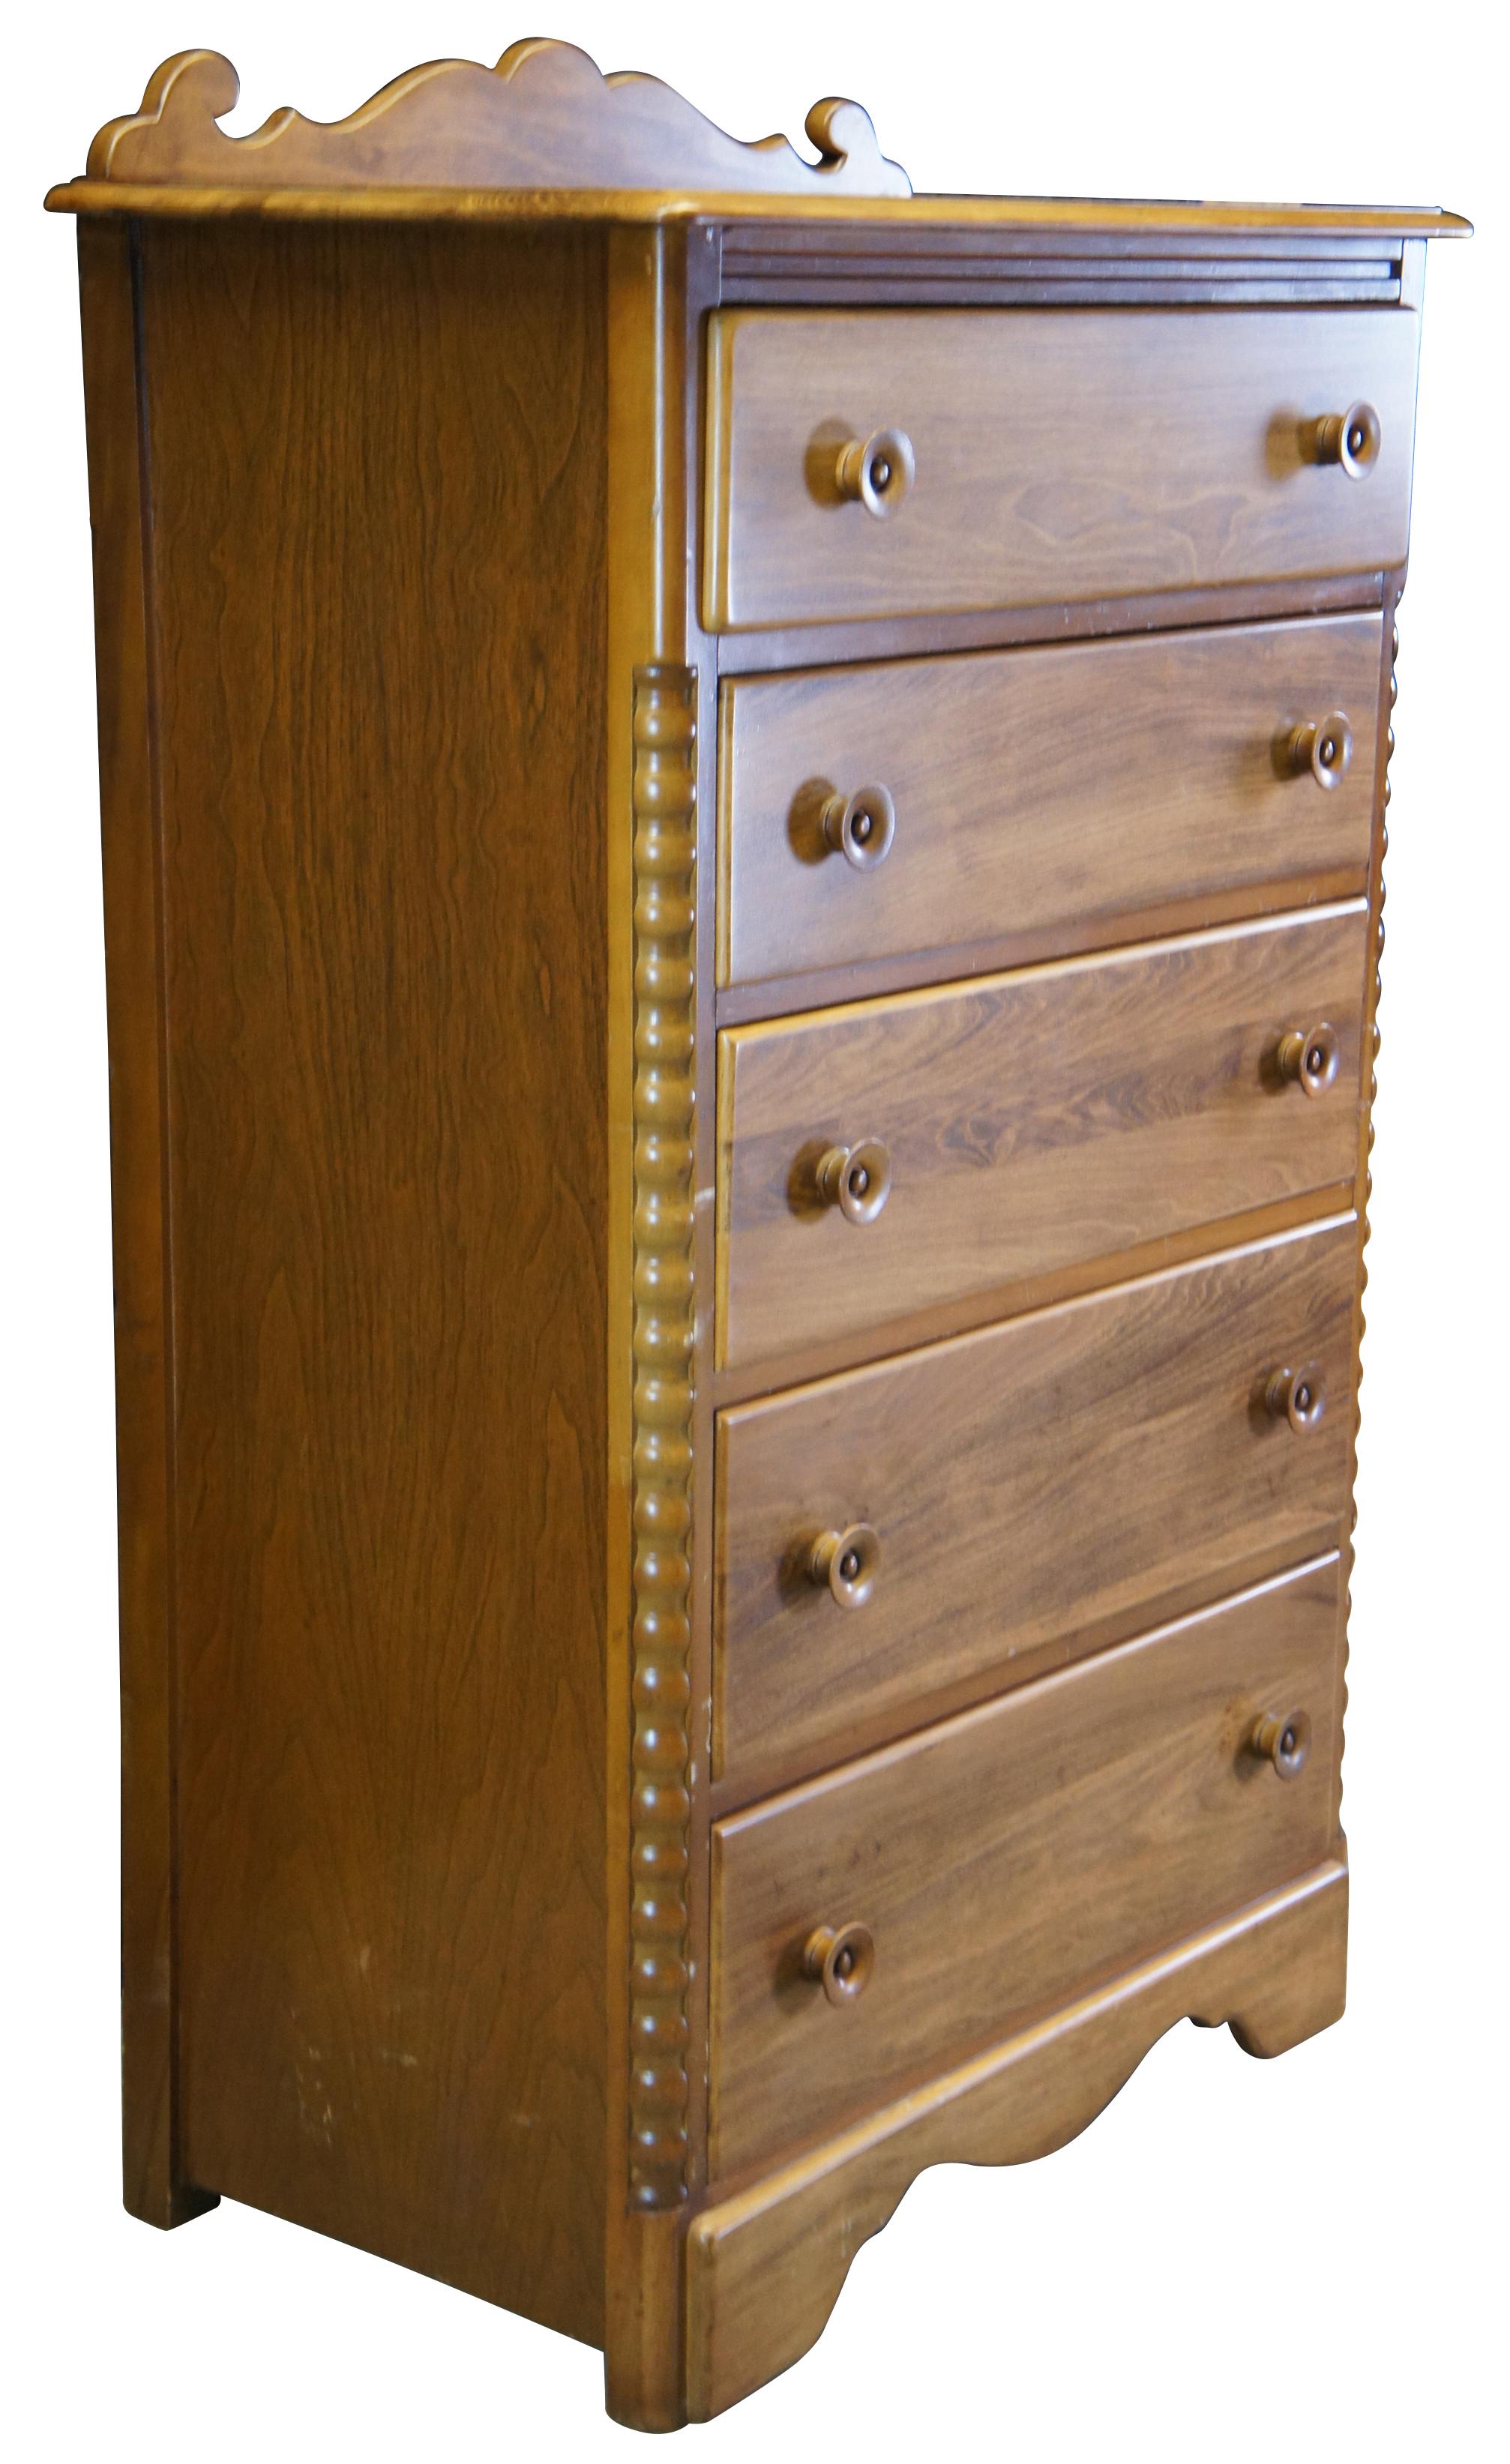 Early American inspired oak dresser, circa 1960s. Features 5 dovetailed drawers with quarter cut ribbed sides and ornate backsplash. 

Measures: 34